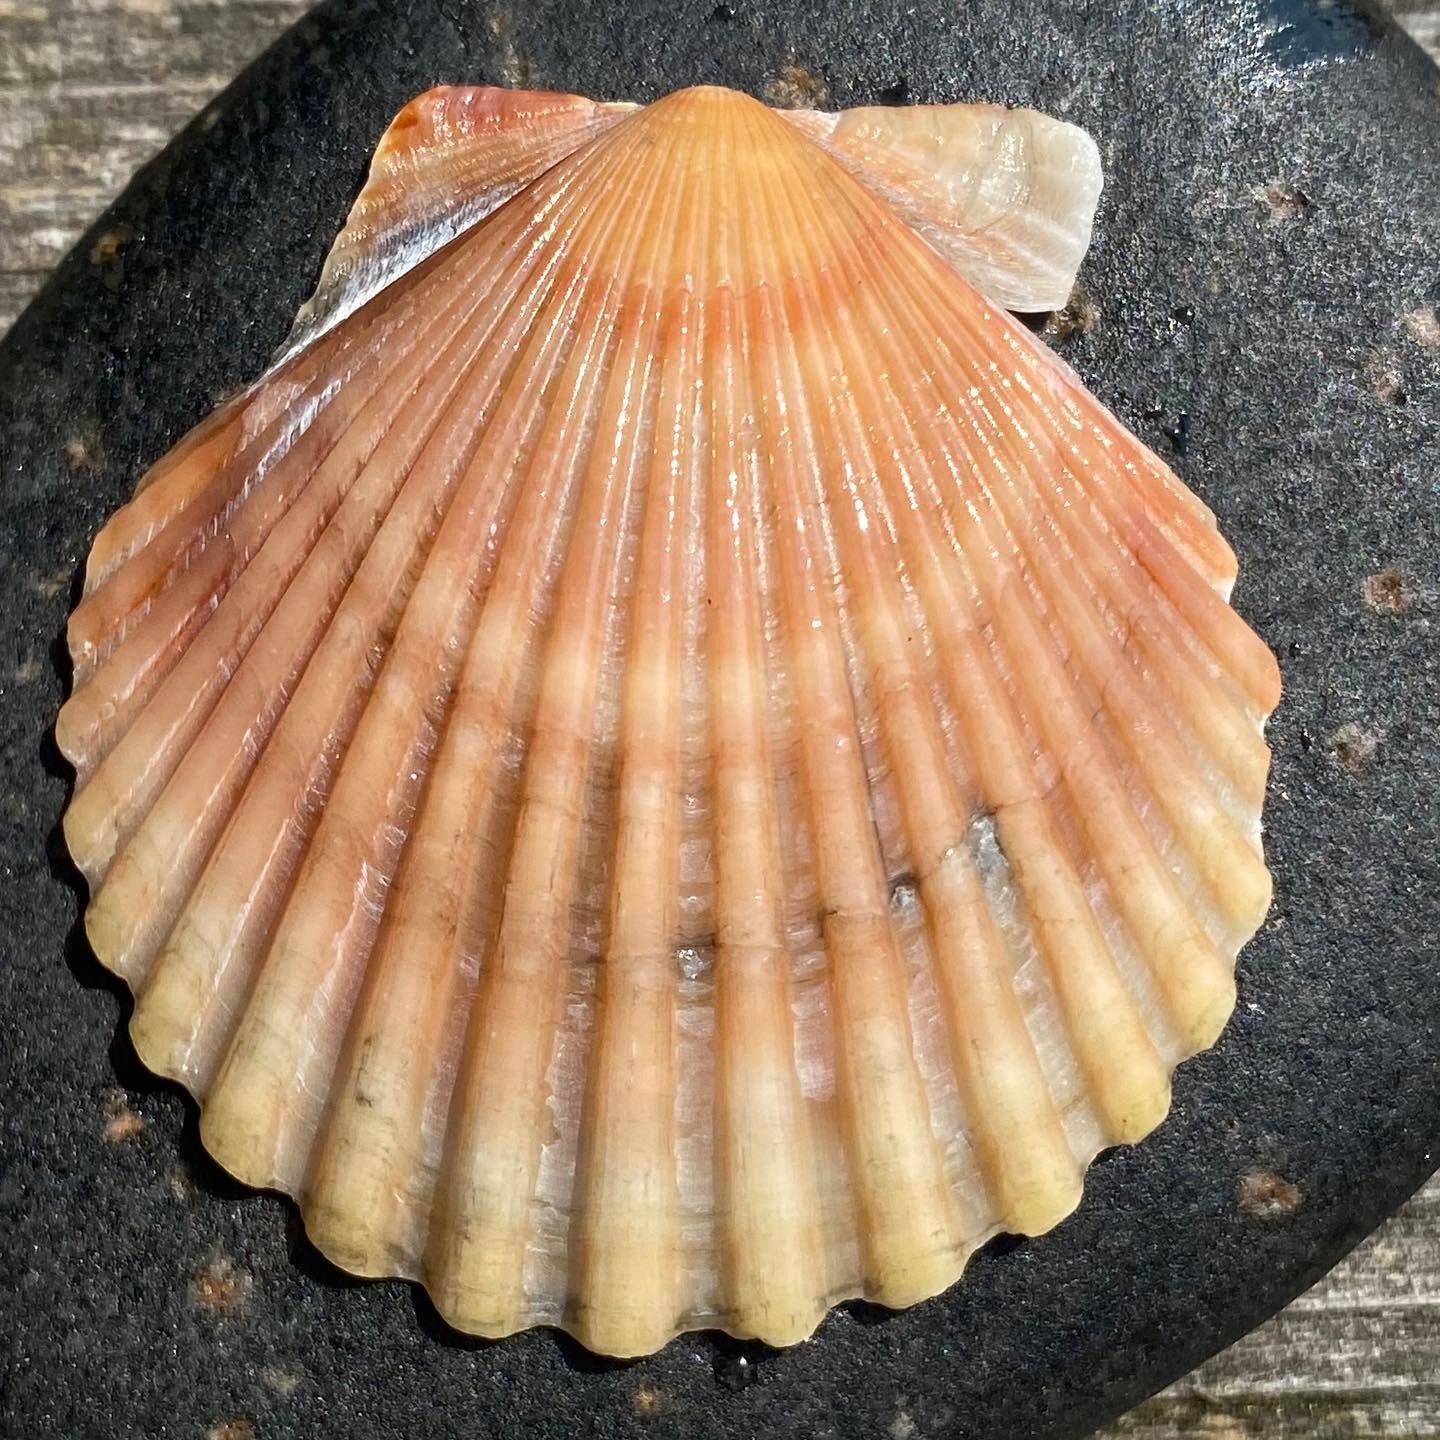 The last scallop of August